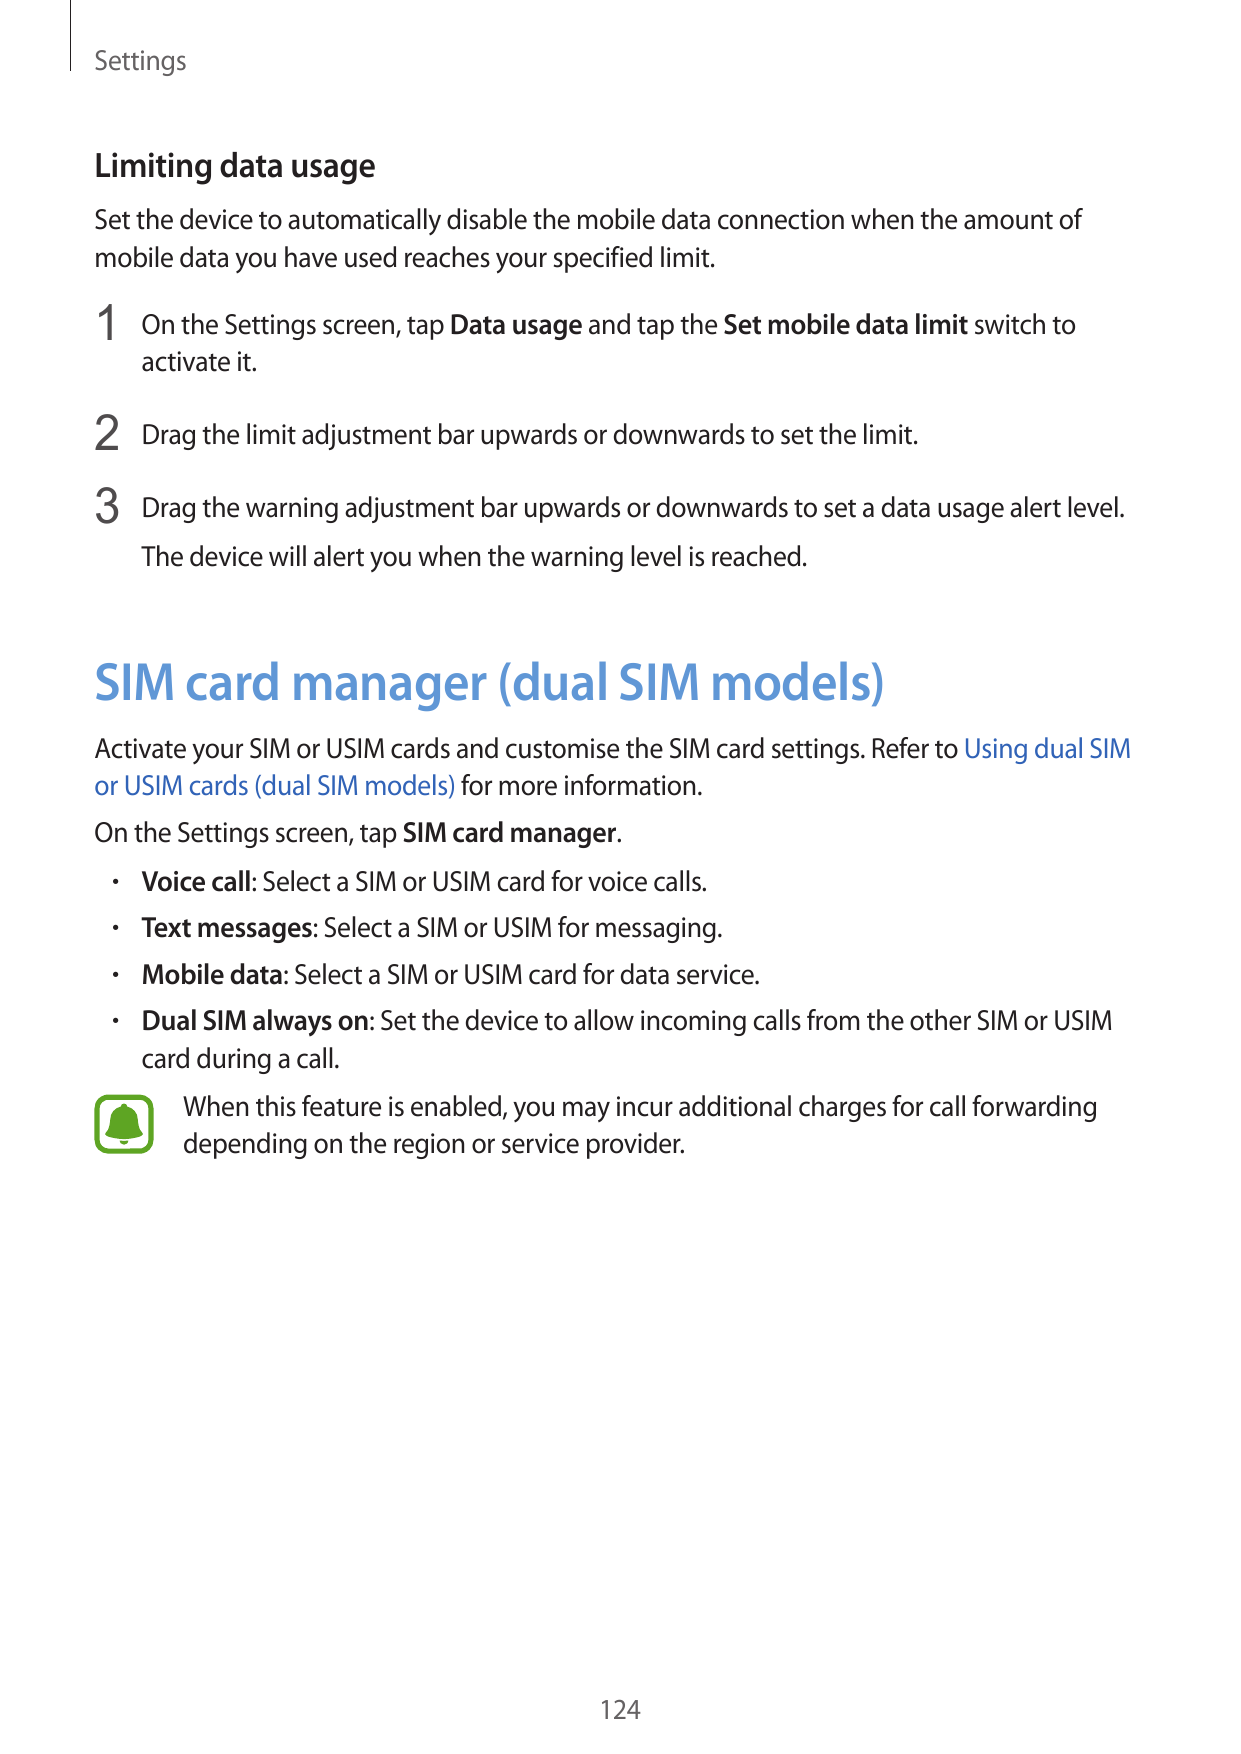 SettingsLimiting data usageSet the device to automatically disable the mobile data connection when the amount ofmobile data you 